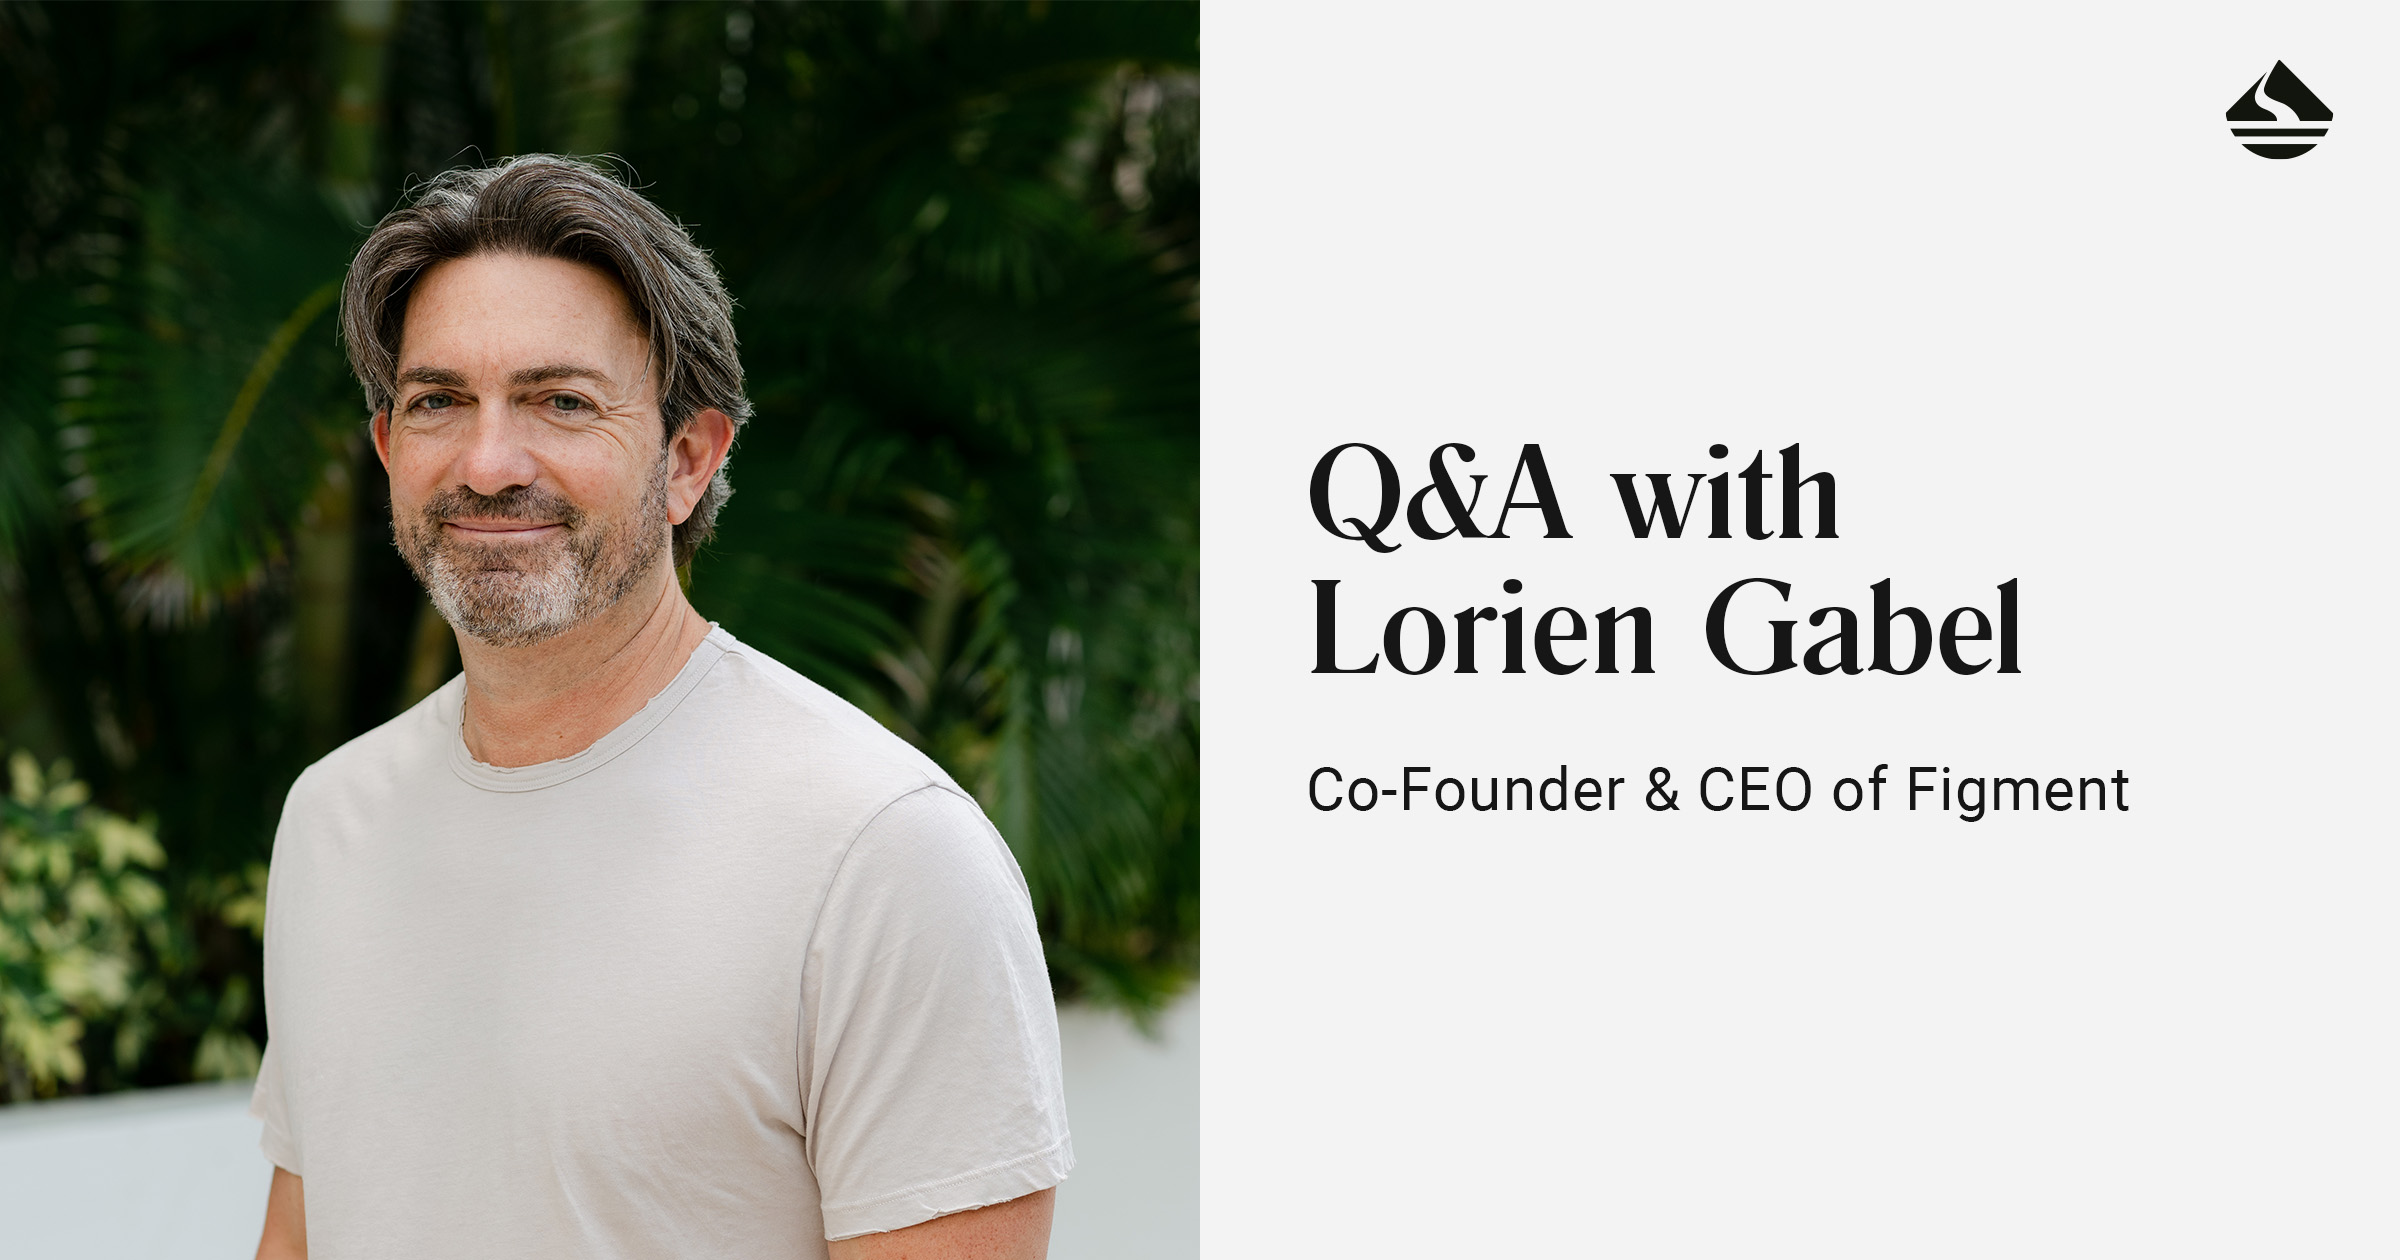 Q&A with Lorien Gabel, Co-Founder & CEO of Figment